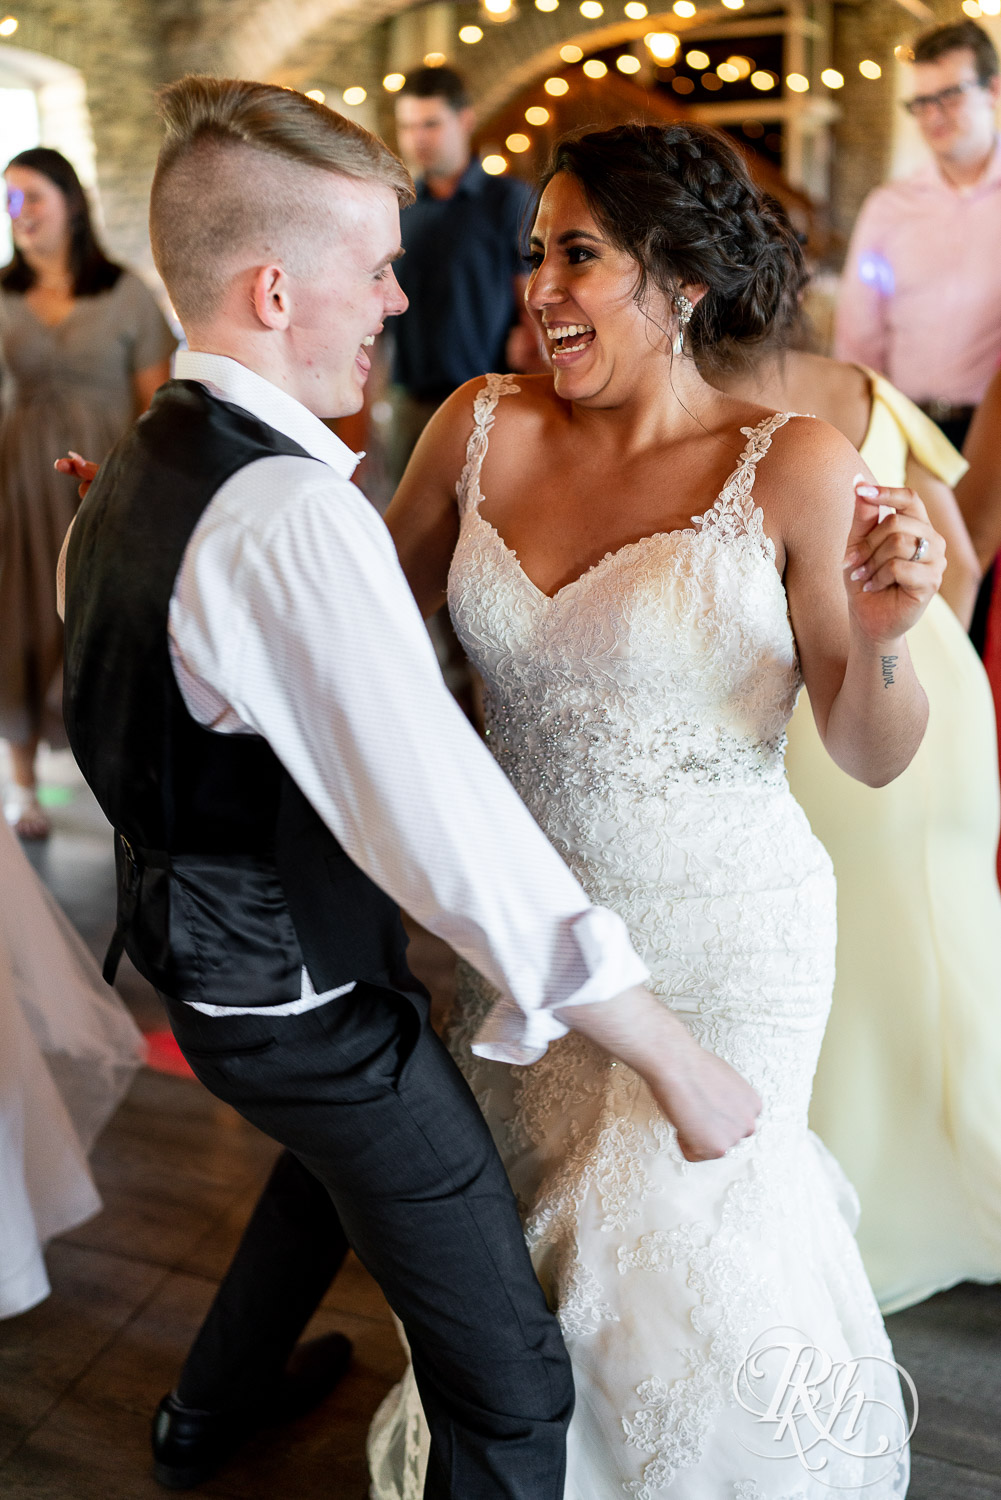 Guests dance with bride and groom at wedding reception at Mayowood Stone Barn in Rochester, Minnesota.